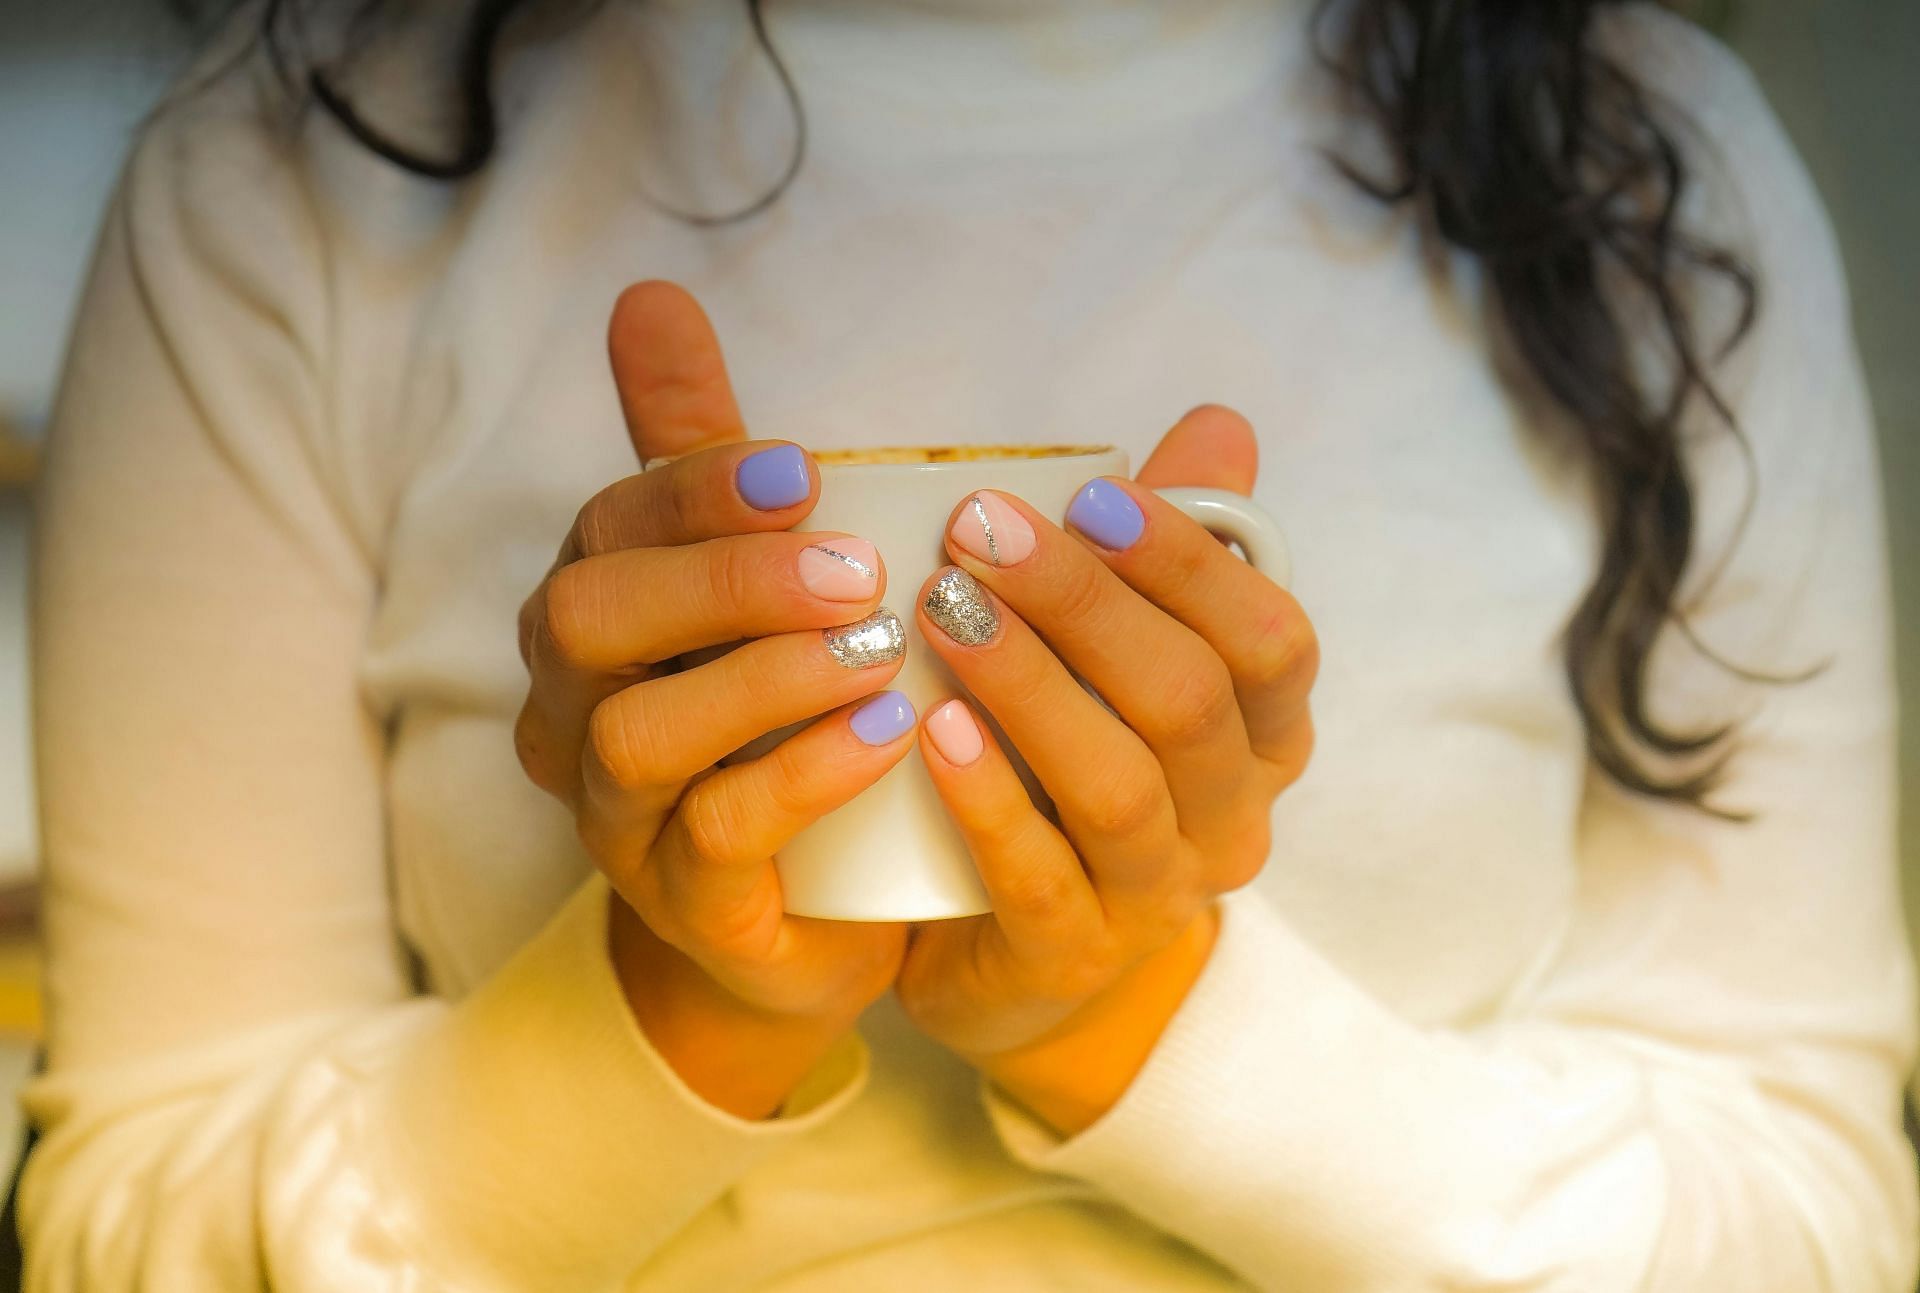 tips to stop picking nails (image sourced via Pexels / Photo by nikita)